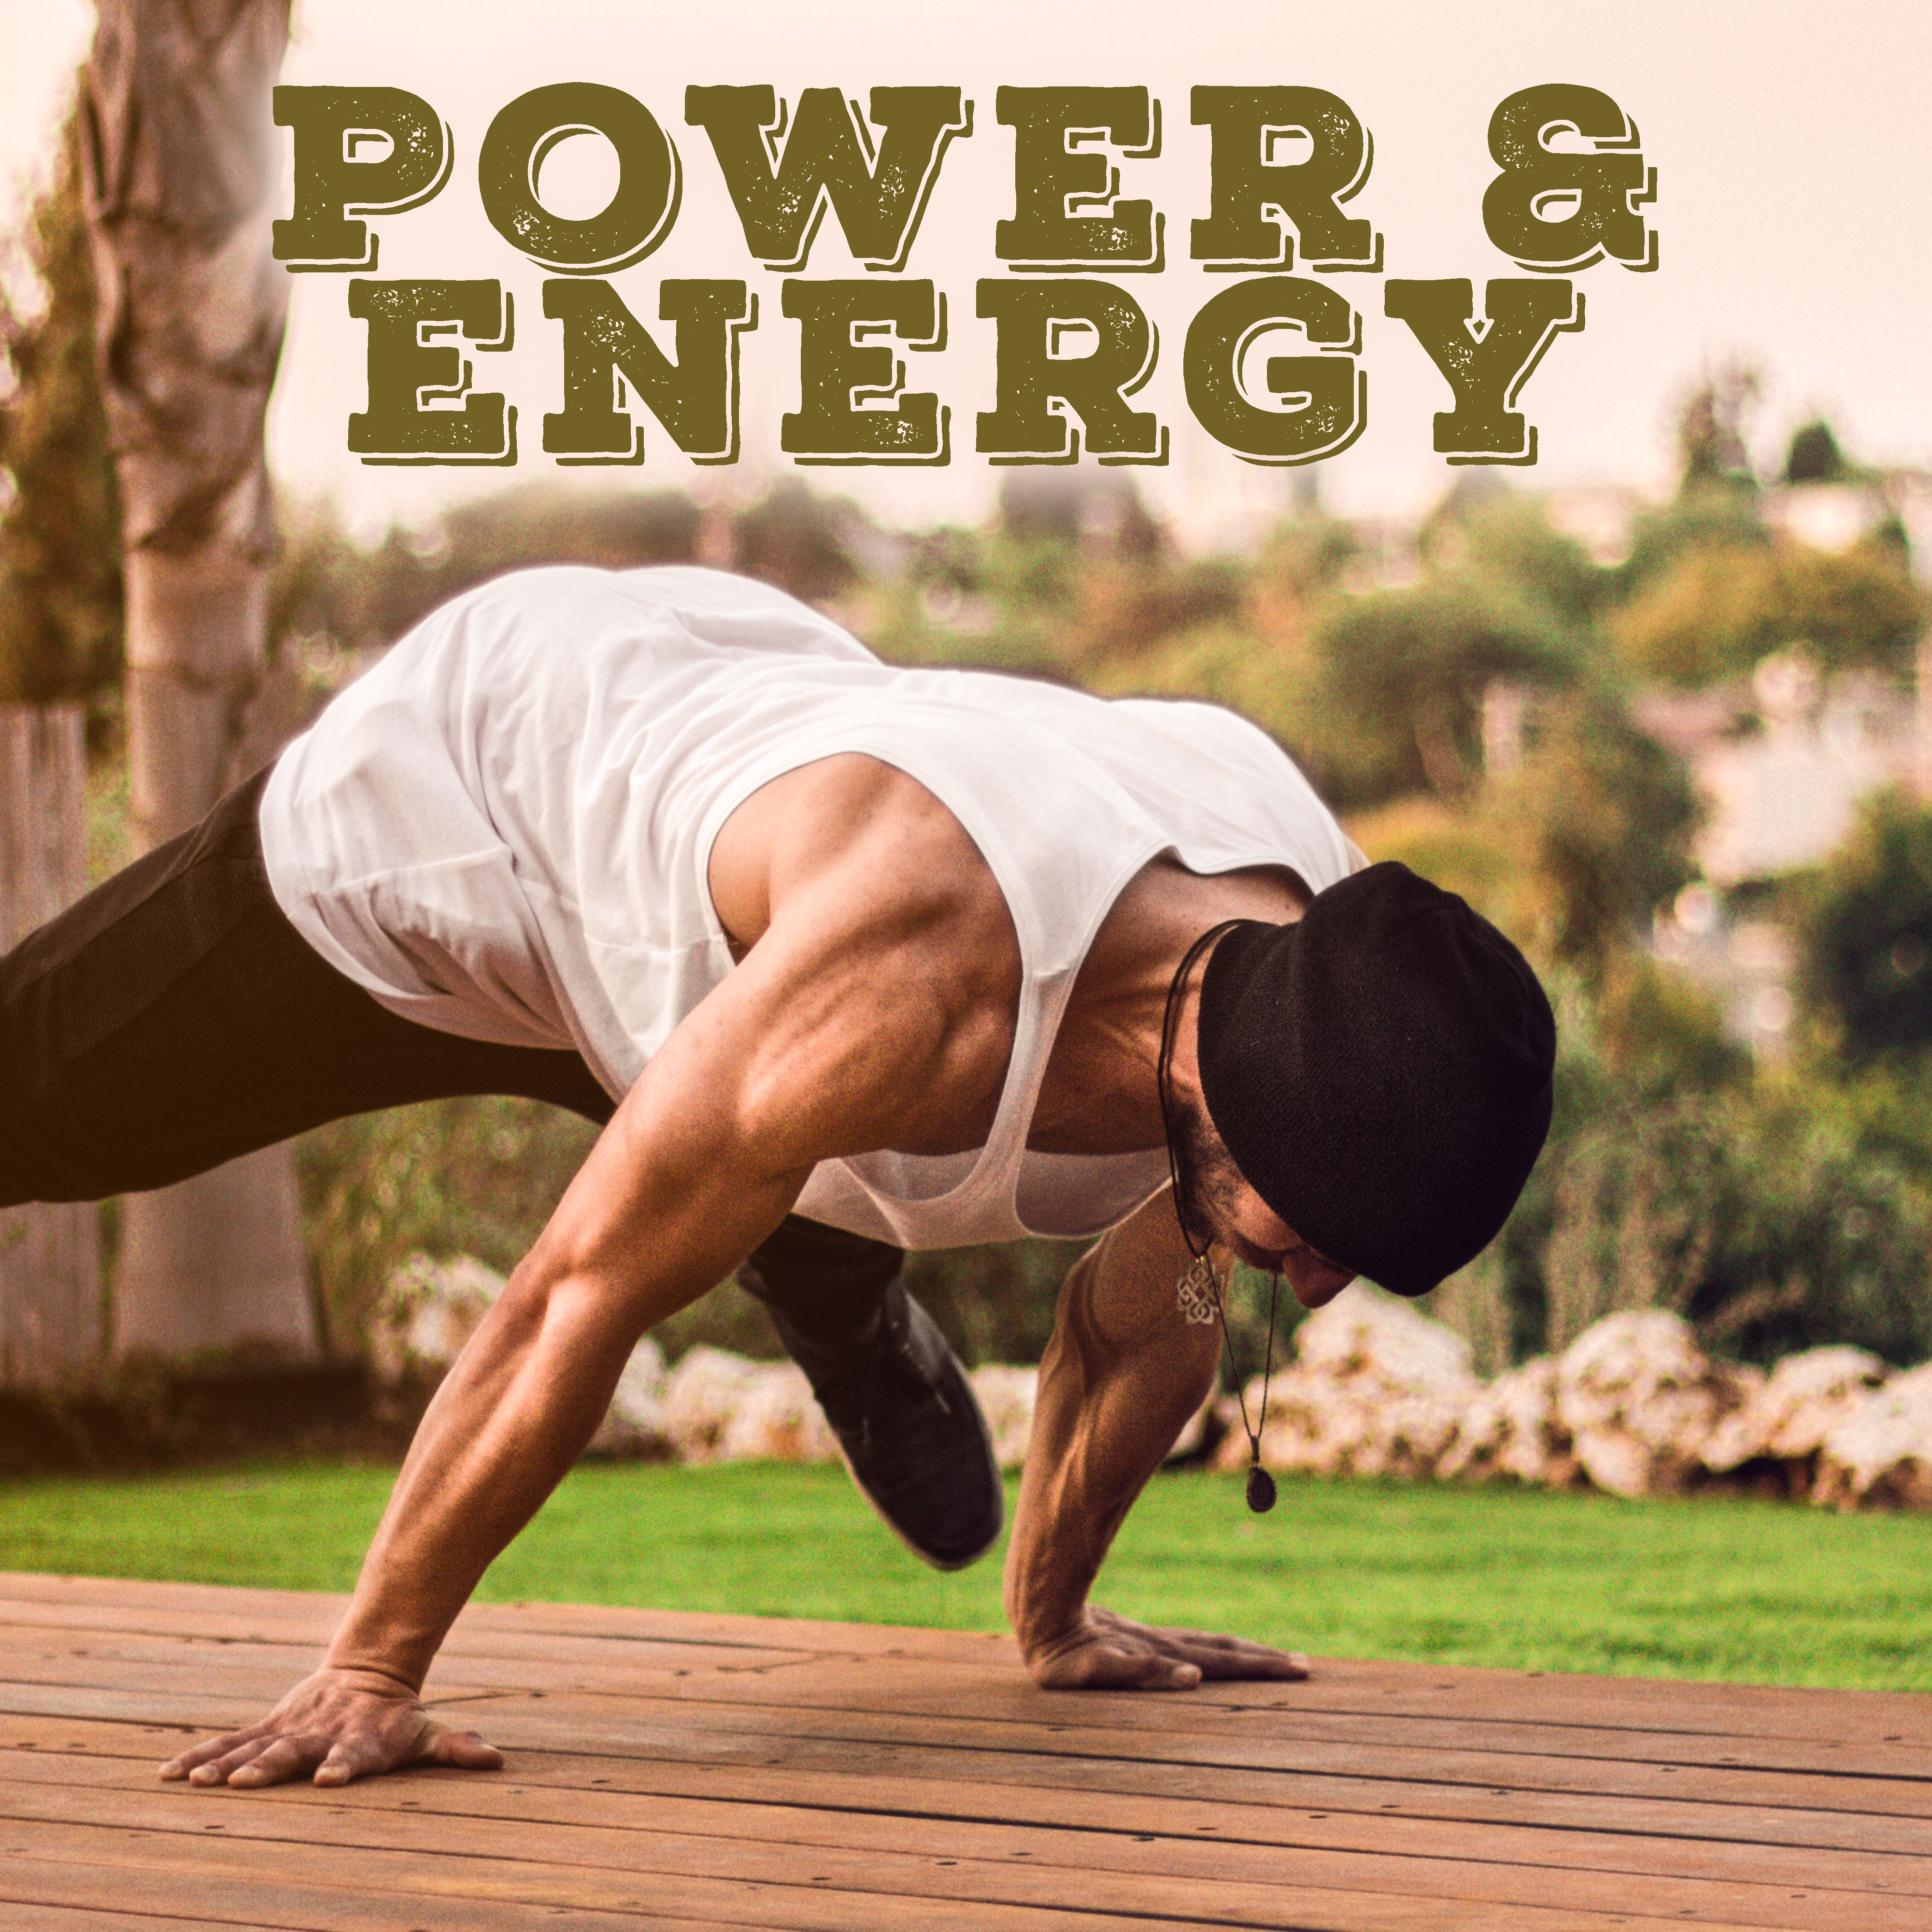 Power & Energy – Run Training, Workout Music, Relax for Body, Running Hits, Relaxed Mind